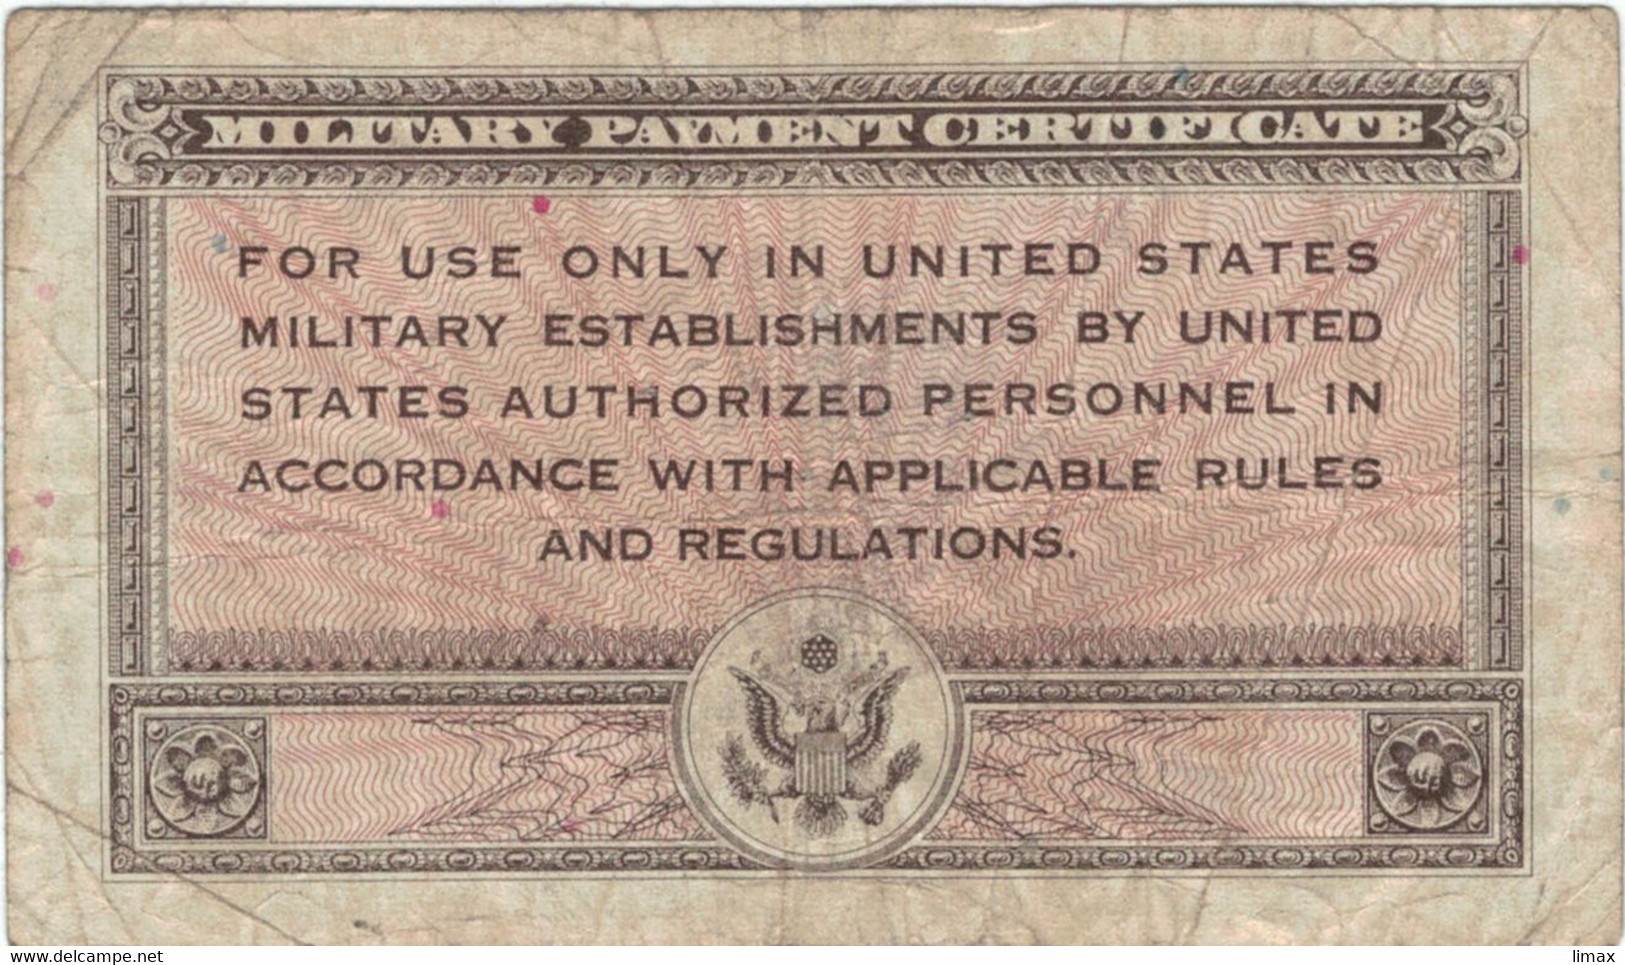 MILITARIA - MILITARY PAYMENT CERTIFICATE SERIE 461 - 1947 NON DATE - ONE 1 DOLLAR A03884712A - 1946 - Reeksen 461